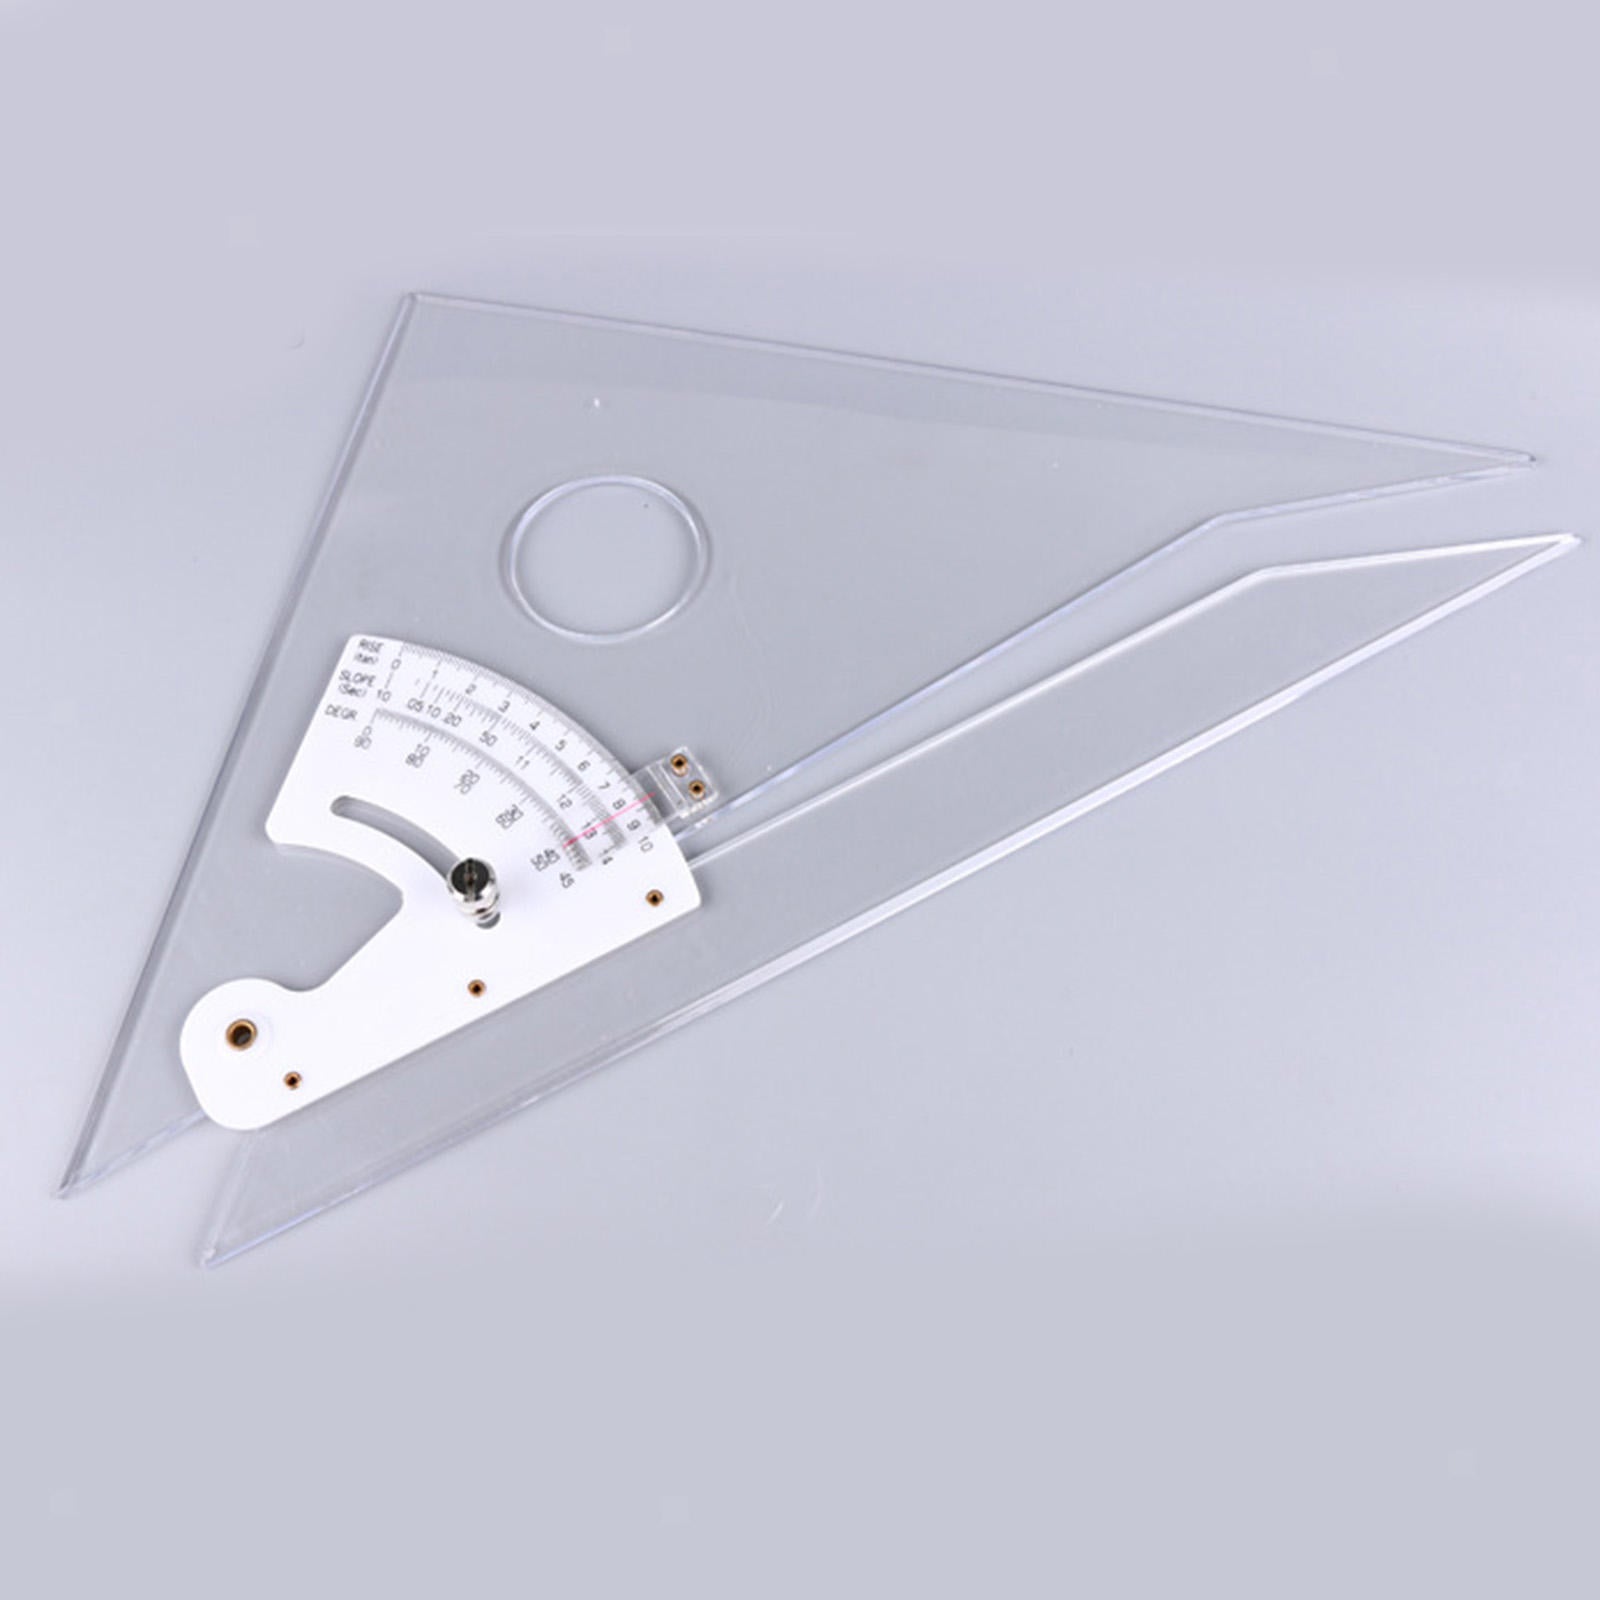 Acrylic Drafting Triangle Ruler Clear Metric Adjustable Precision 30cm Scale